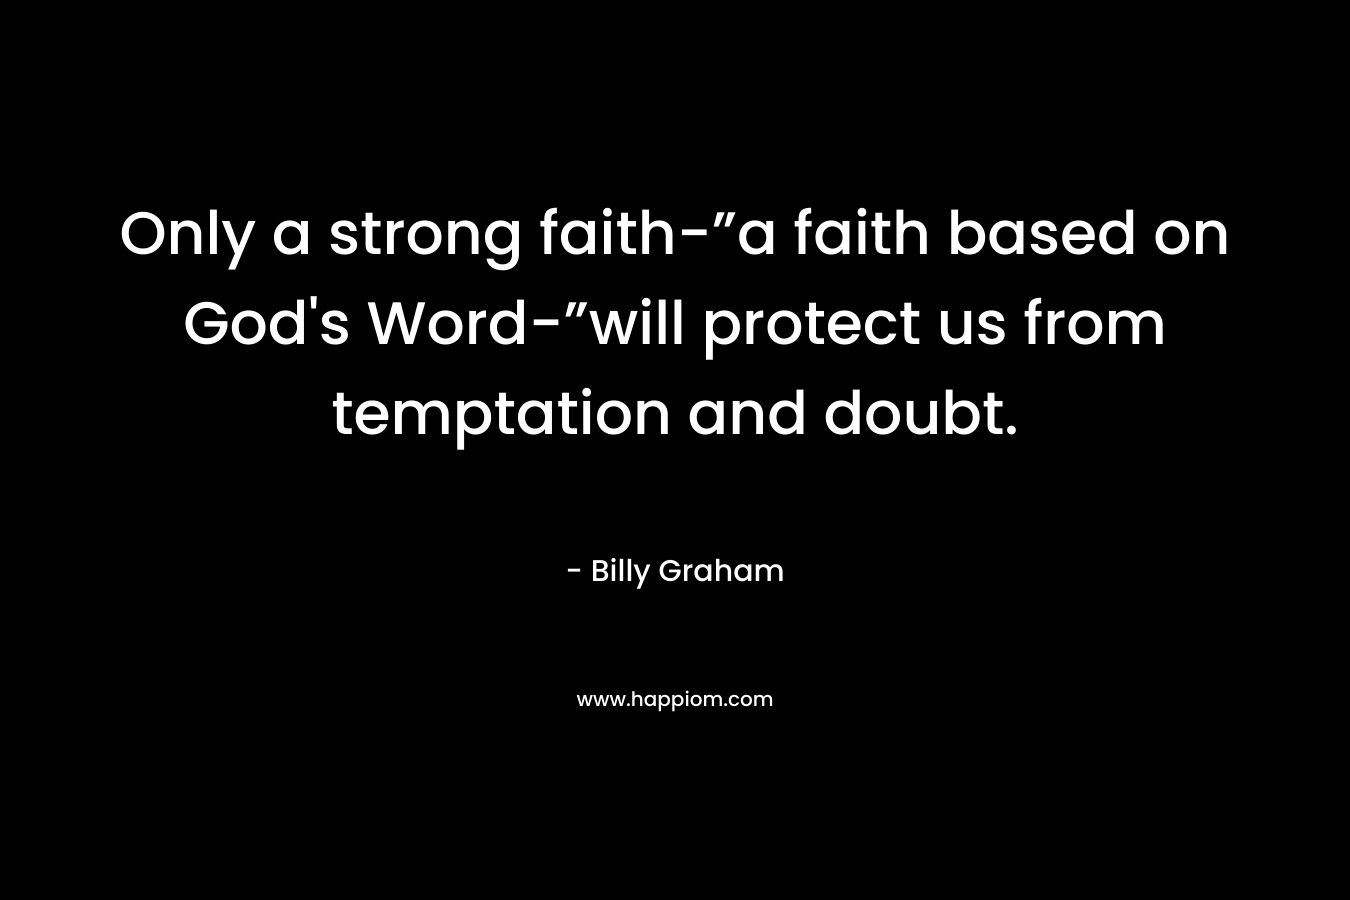 Only a strong faith-”a faith based on God's Word-”will protect us from temptation and doubt.